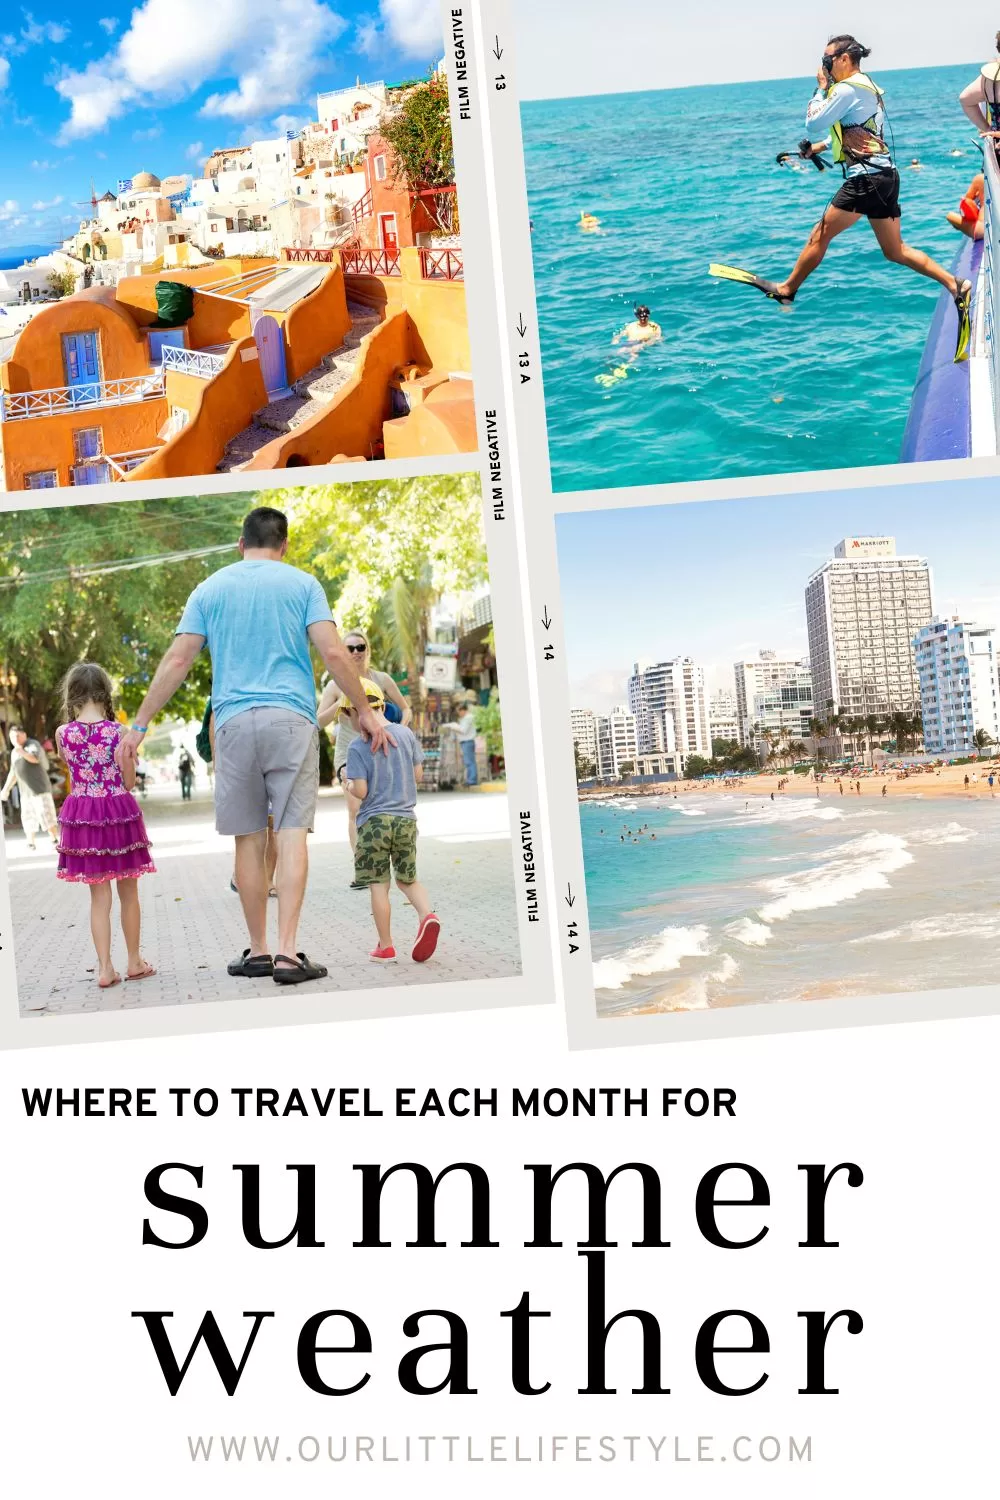 Summer Weather Travel Guide